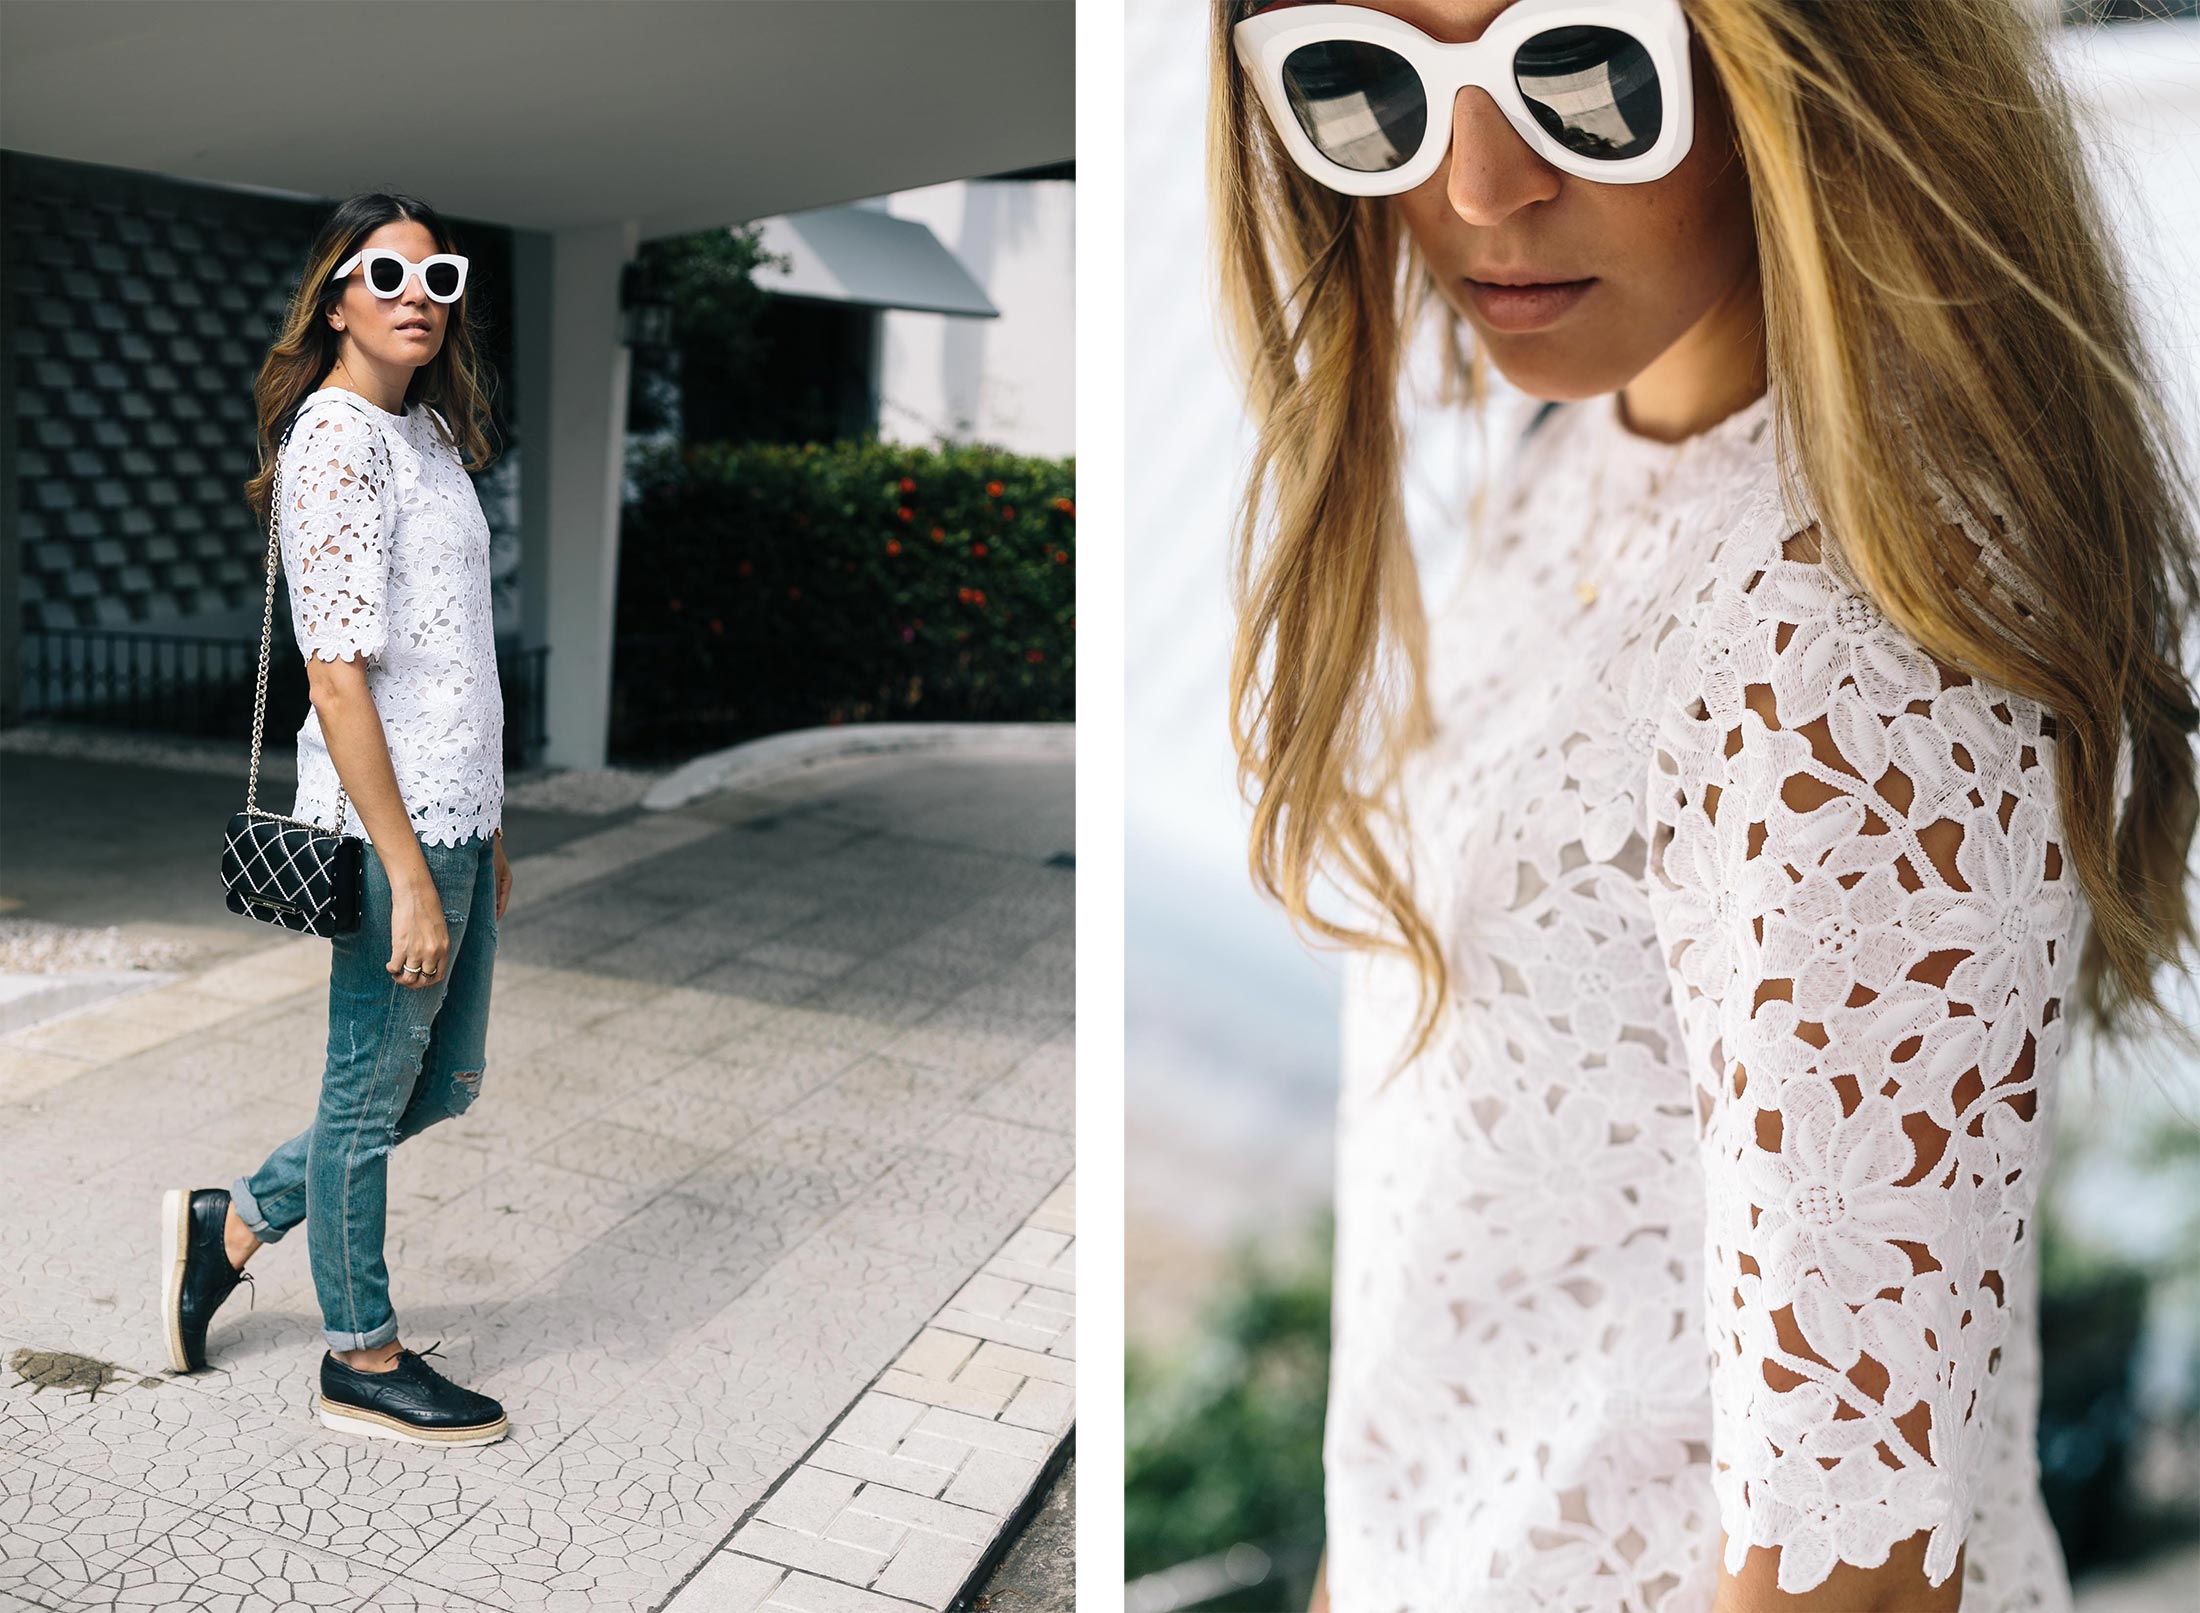 Everyday denim, black and white outfit inspiration for spring summer 2016